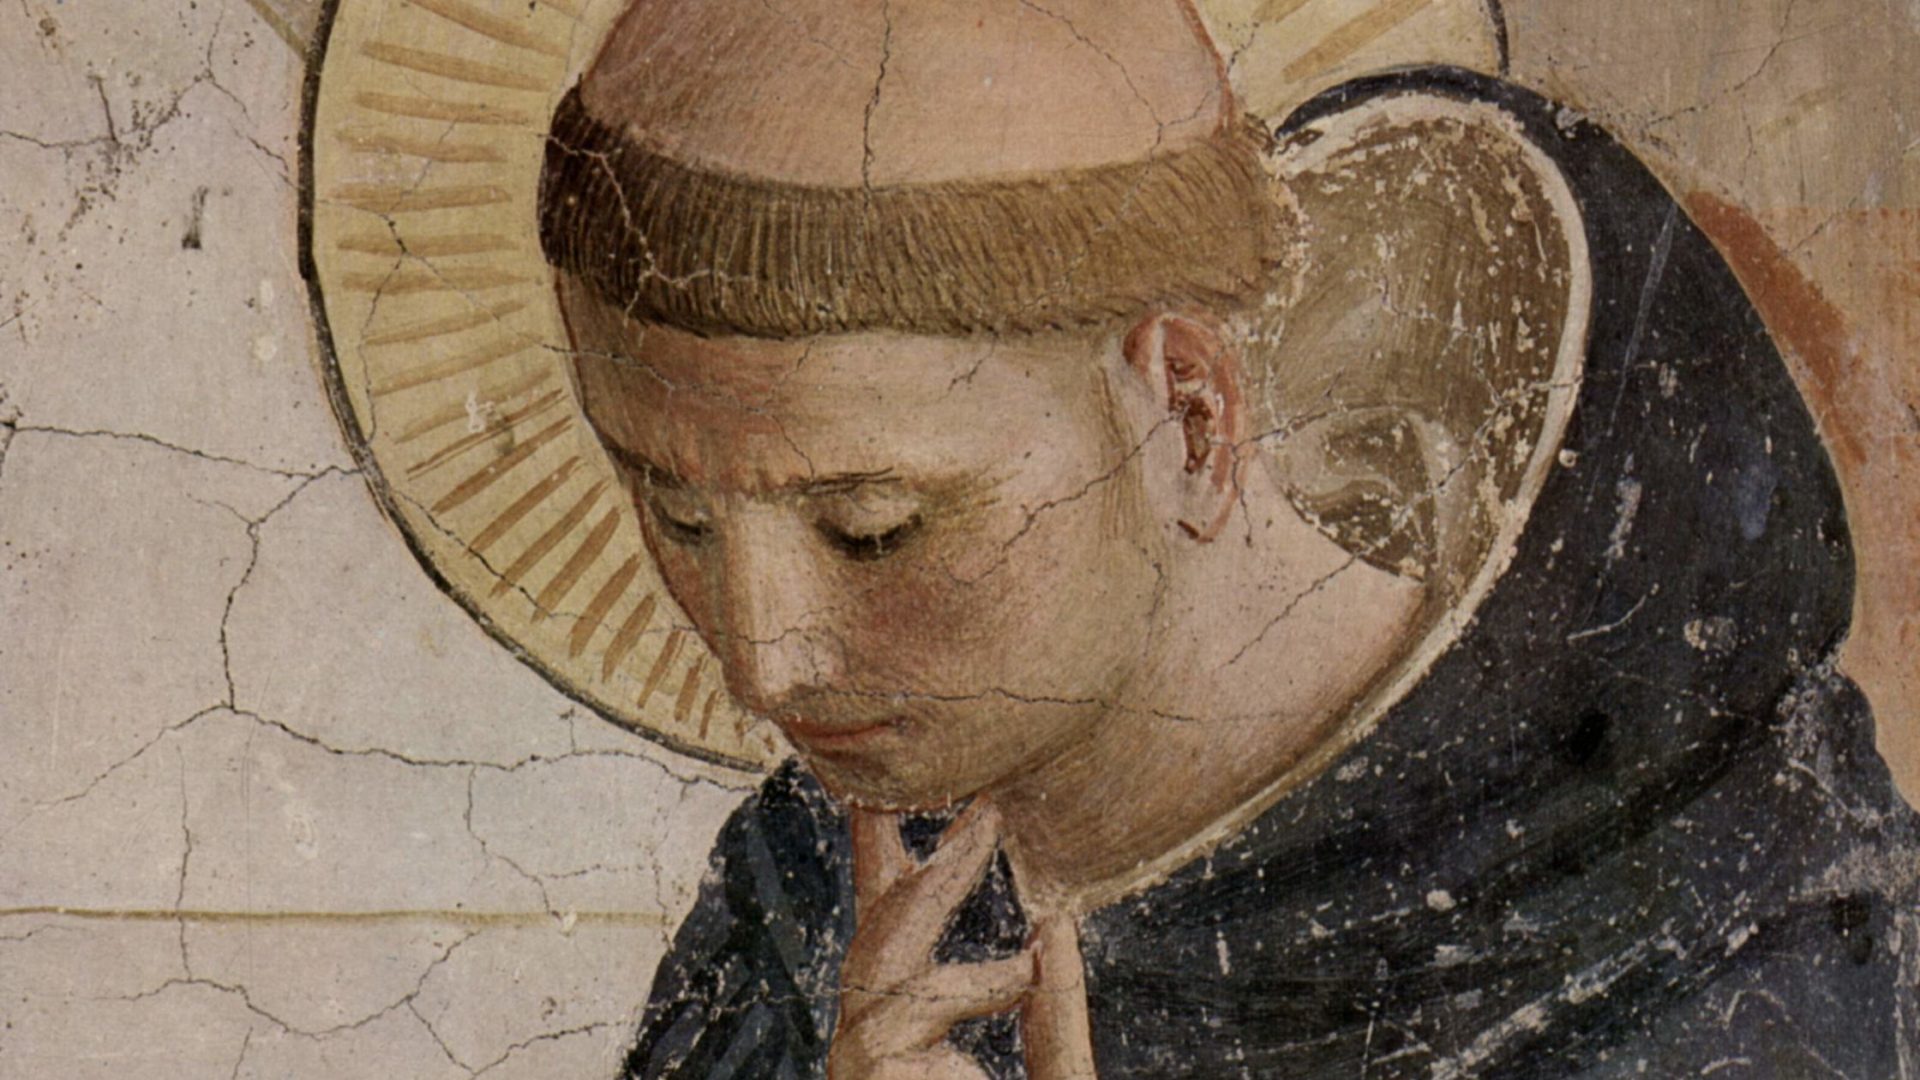 Fra_Angelico_052